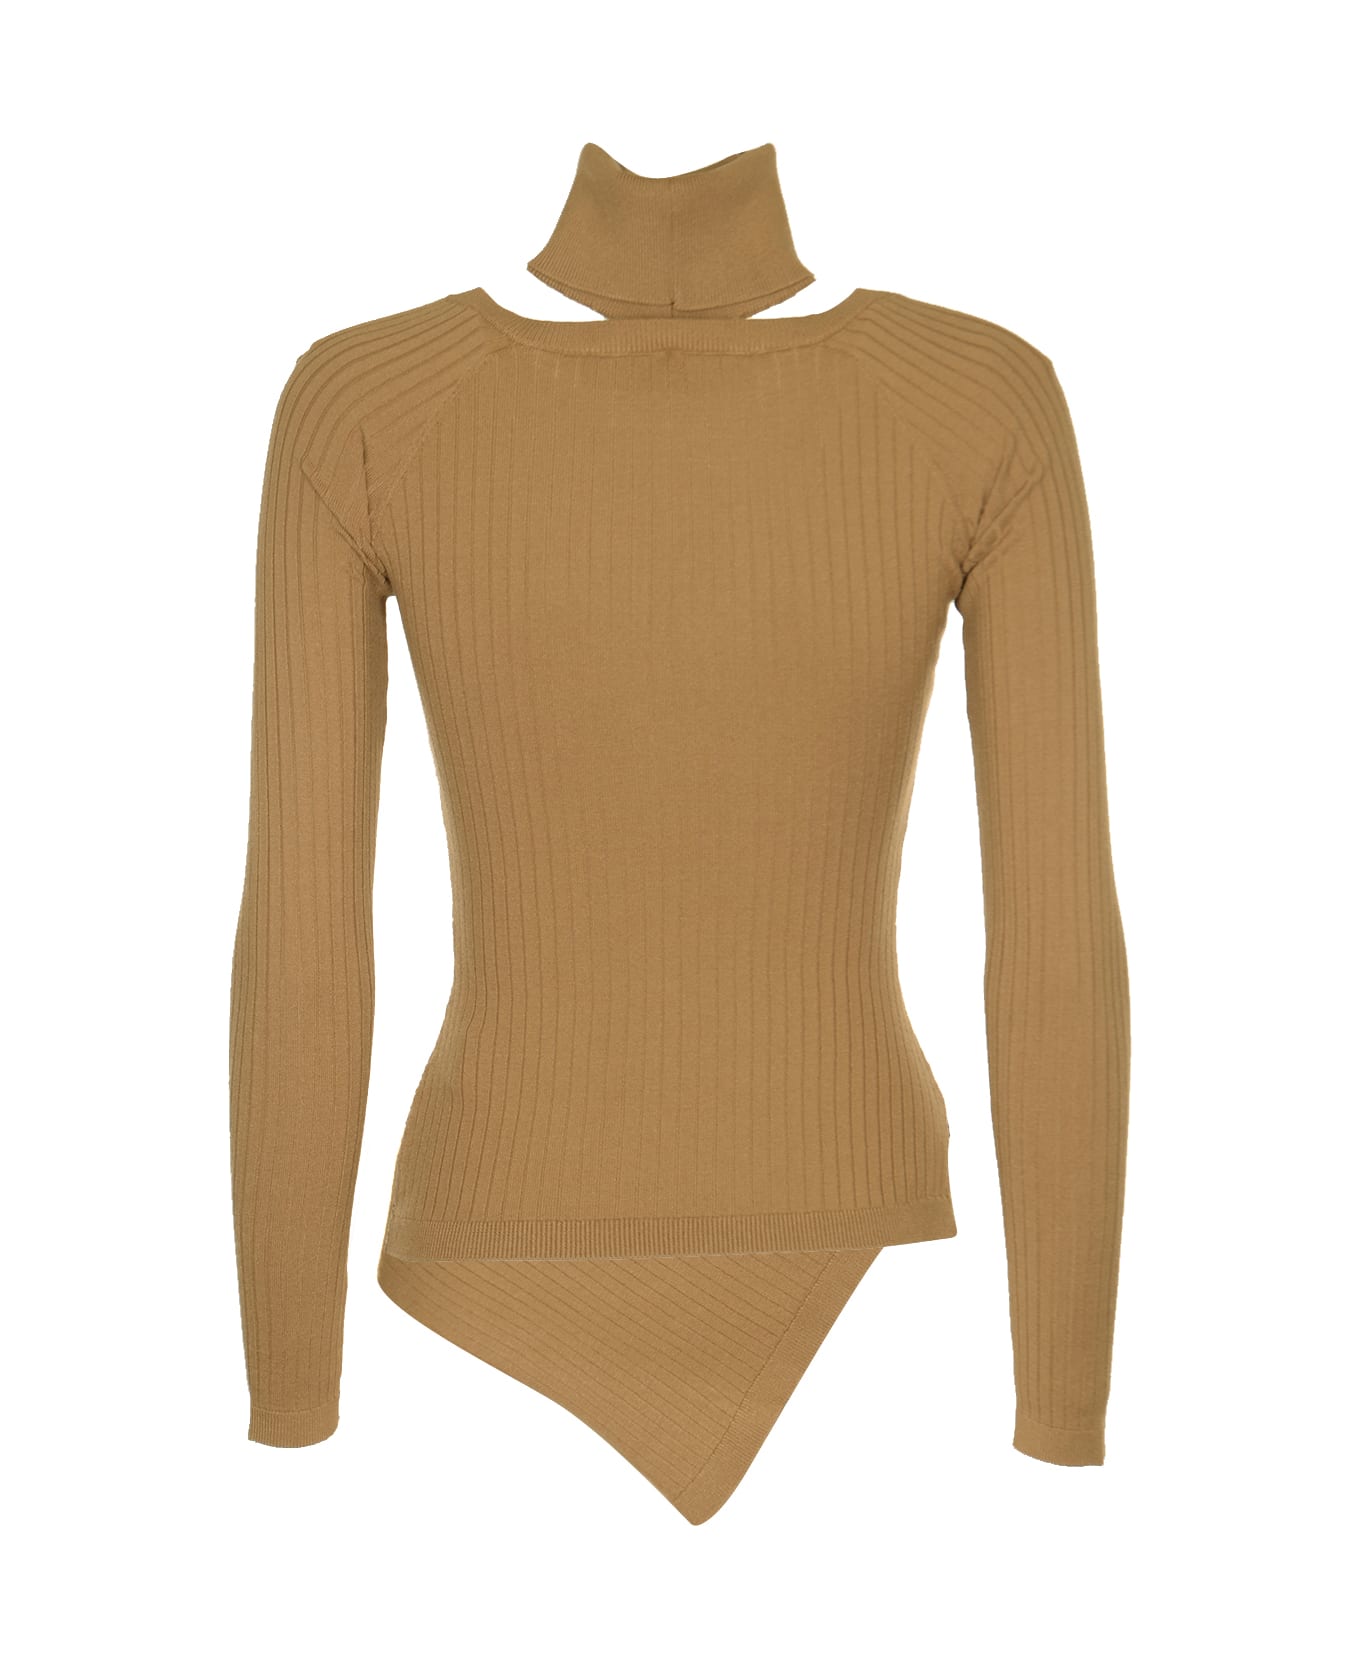 Federica Tosi Ribbed Bodysuit - Brown ボディスーツ